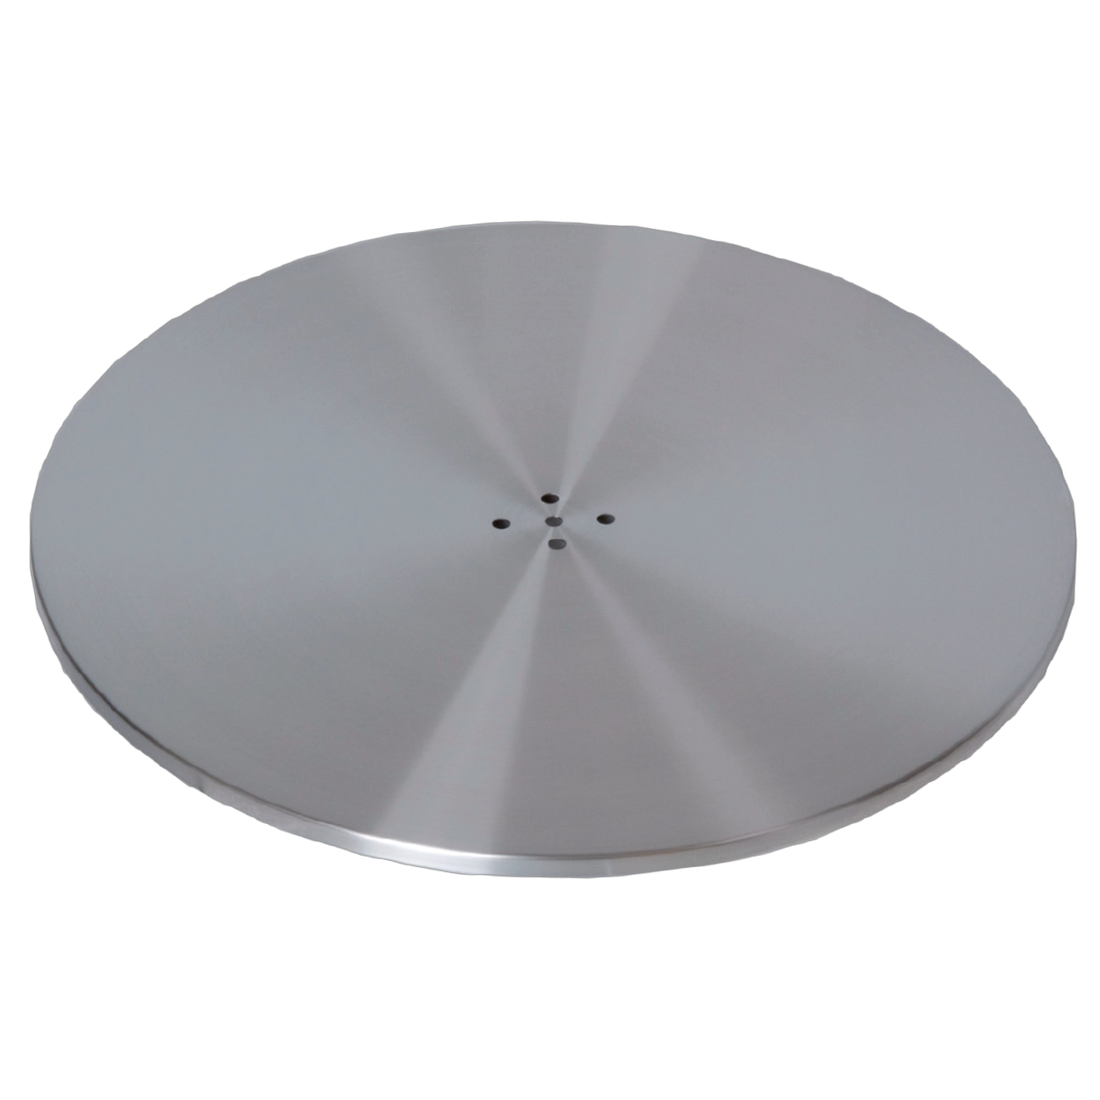 Round bottom plate with cover plate